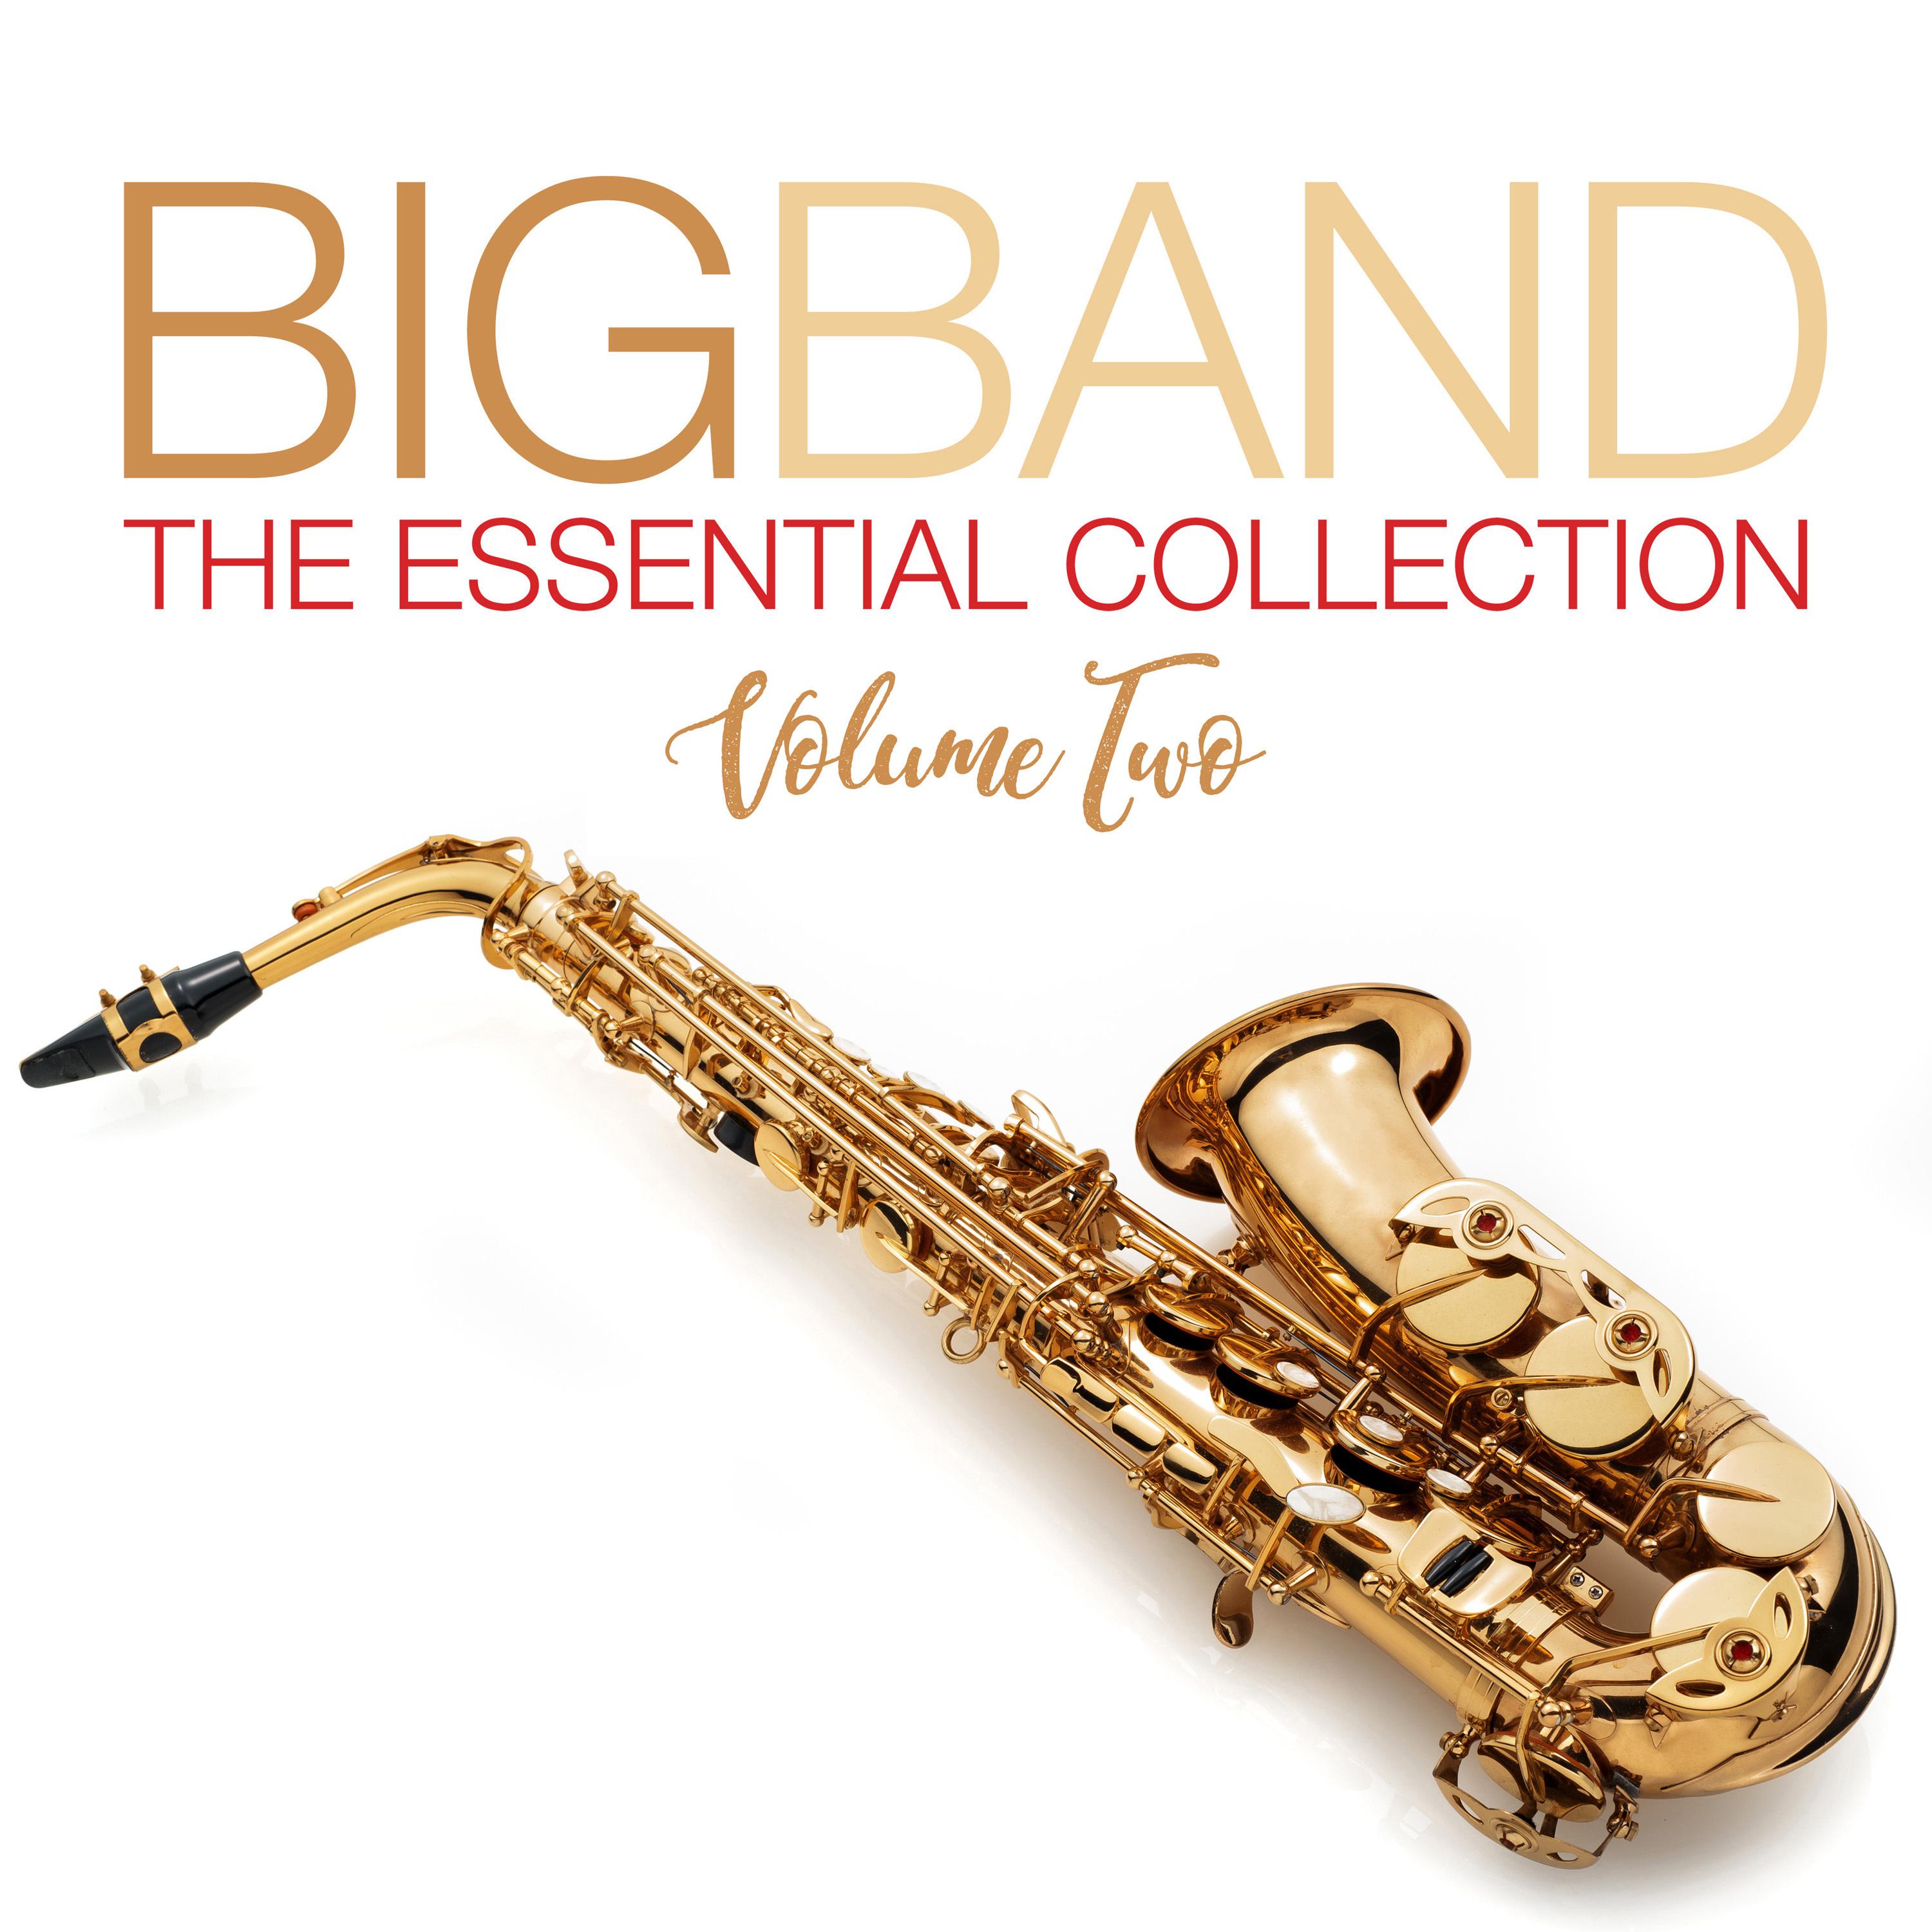 Big Band The Essential Collection Volume Two